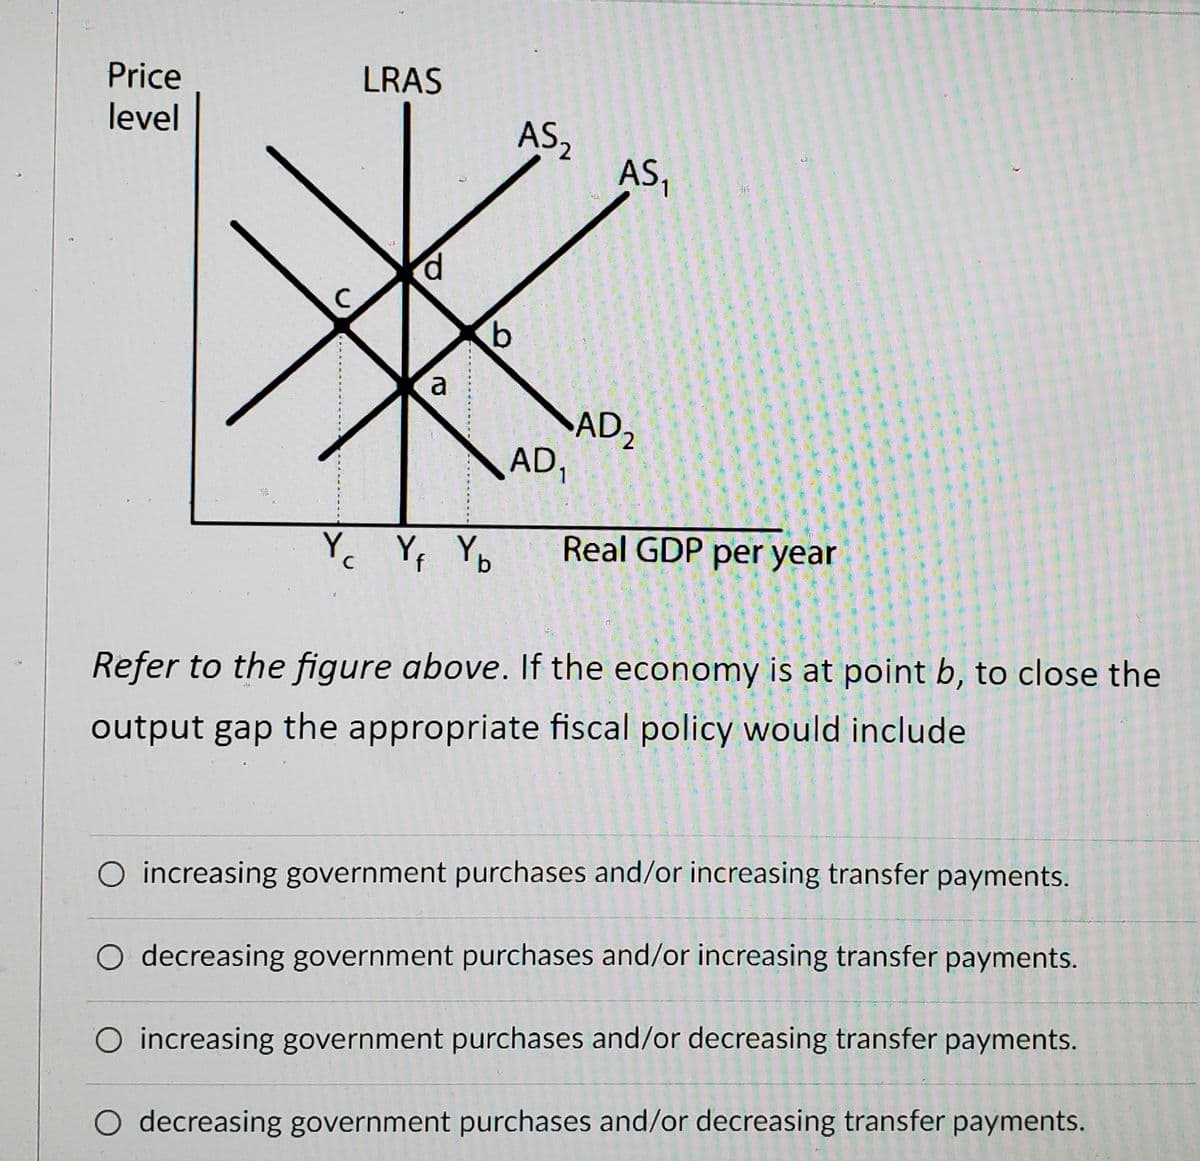 LRAS
Price
level
AS,
AS,
p.
a
SAD,
AD1
龍
Yc Yf Yo
Real GDP per year
Refer to the figure above. If the economy is at point b, to close the
output gap the appropriate fiscal policy would include
O increasing government purchases and/or increasing transfer payments.
O decreasing government purchases and/or increasing transfer payments.
O increasing government purchases and/or decreasing transfer payments.
decreasing government purchases and/or decreasing transfer payments.
C.
